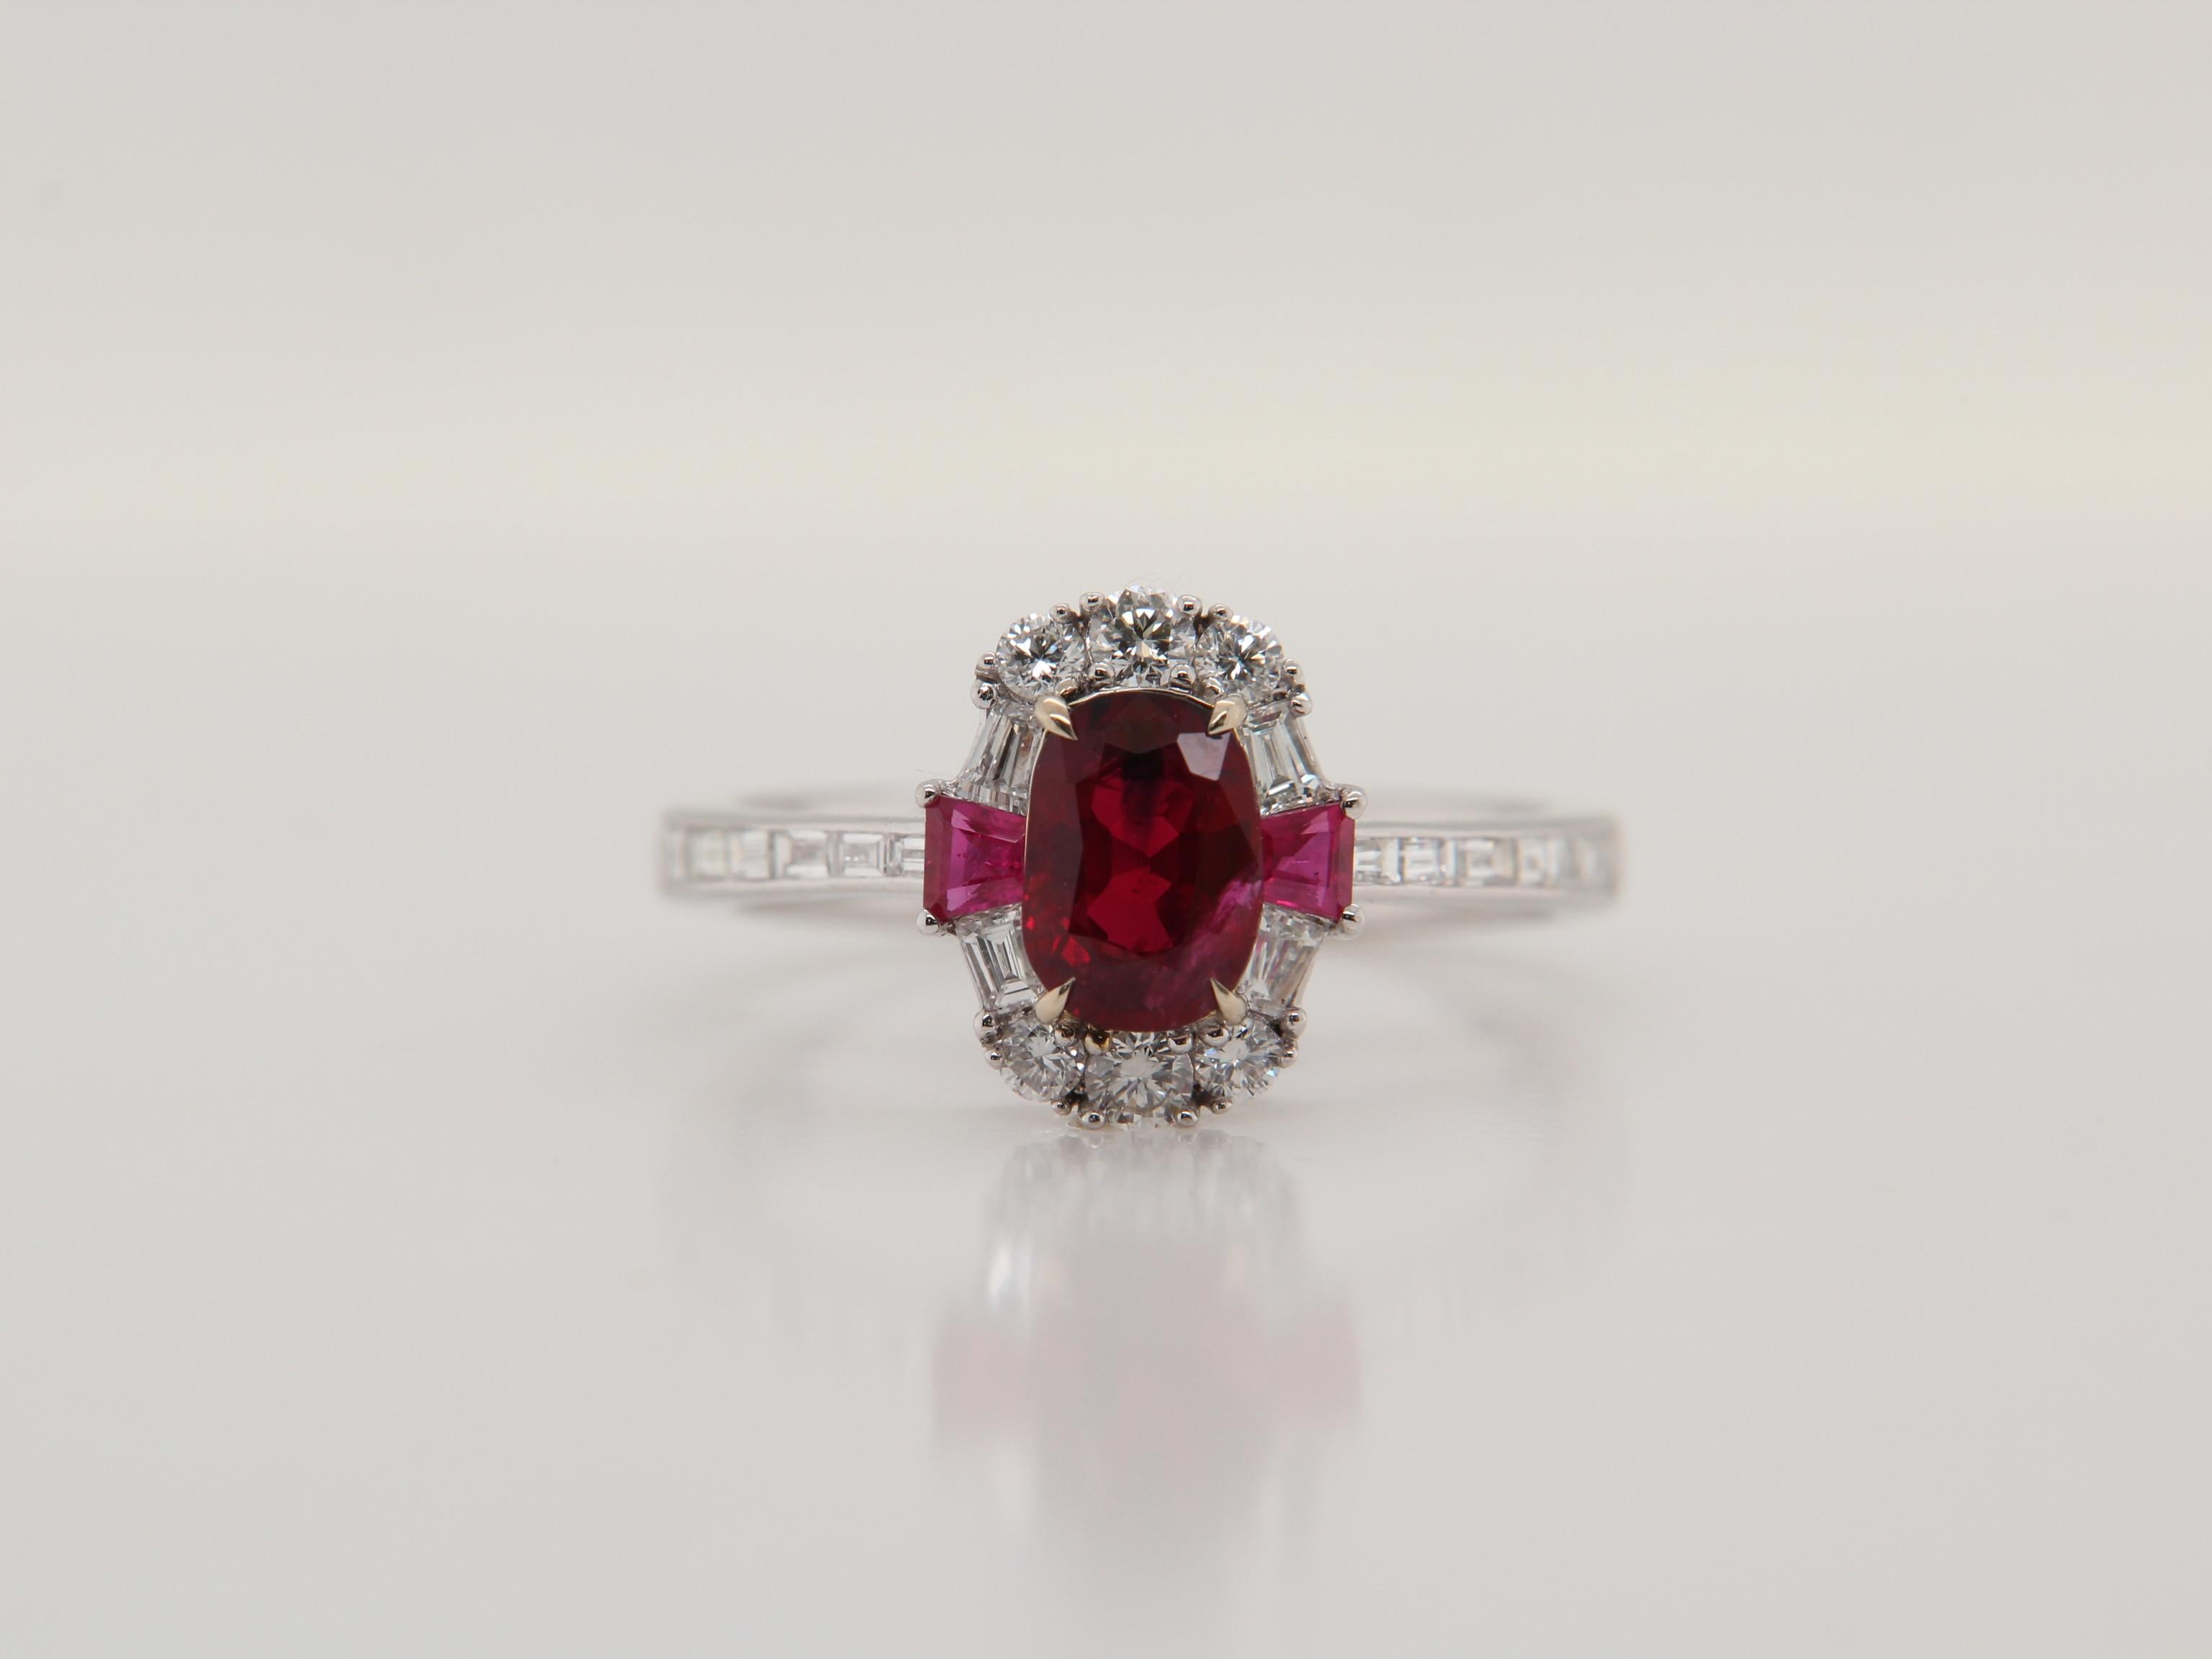 A brand new ruby ring made in 18 Karat fold. The center ruby is of Burmese origin, natural without any heat treatment, and weighs 1.08 carats, certified 'Pigeon Blood' by Gem Research Swisslab. The color has a nice fire to it, with a royal red color